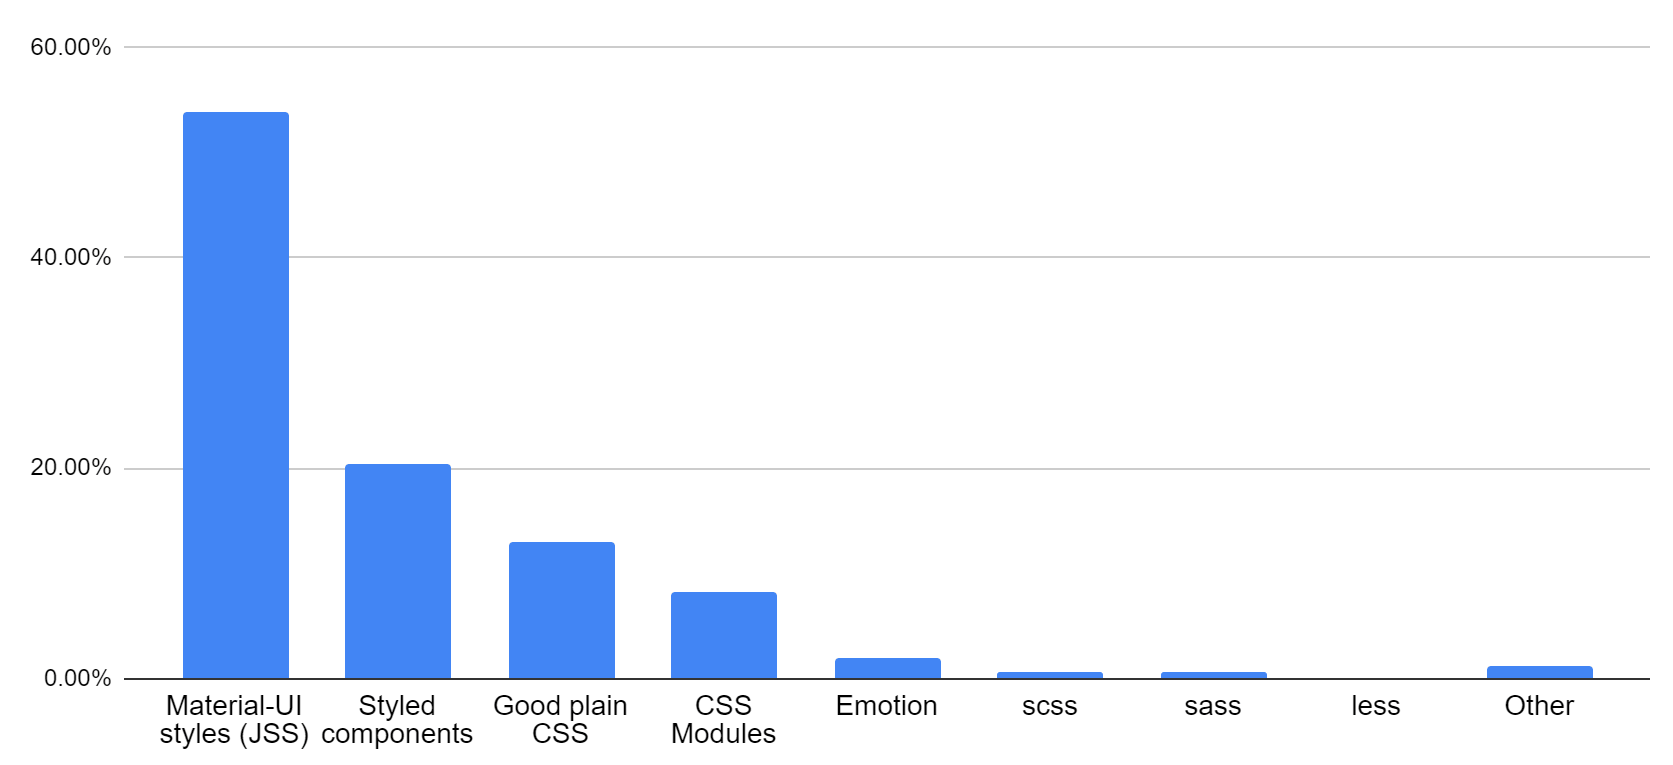 Pie chart: 53.84%    Material-UI styles (JSS), 20.41%    Styled components, 13.01%    Good plain CSS, 8.31%    CSS Modules, 1.96%    Emotion, 0.59%    scss, 0.59%    sass, 0.09%    less, 1.19%    Other